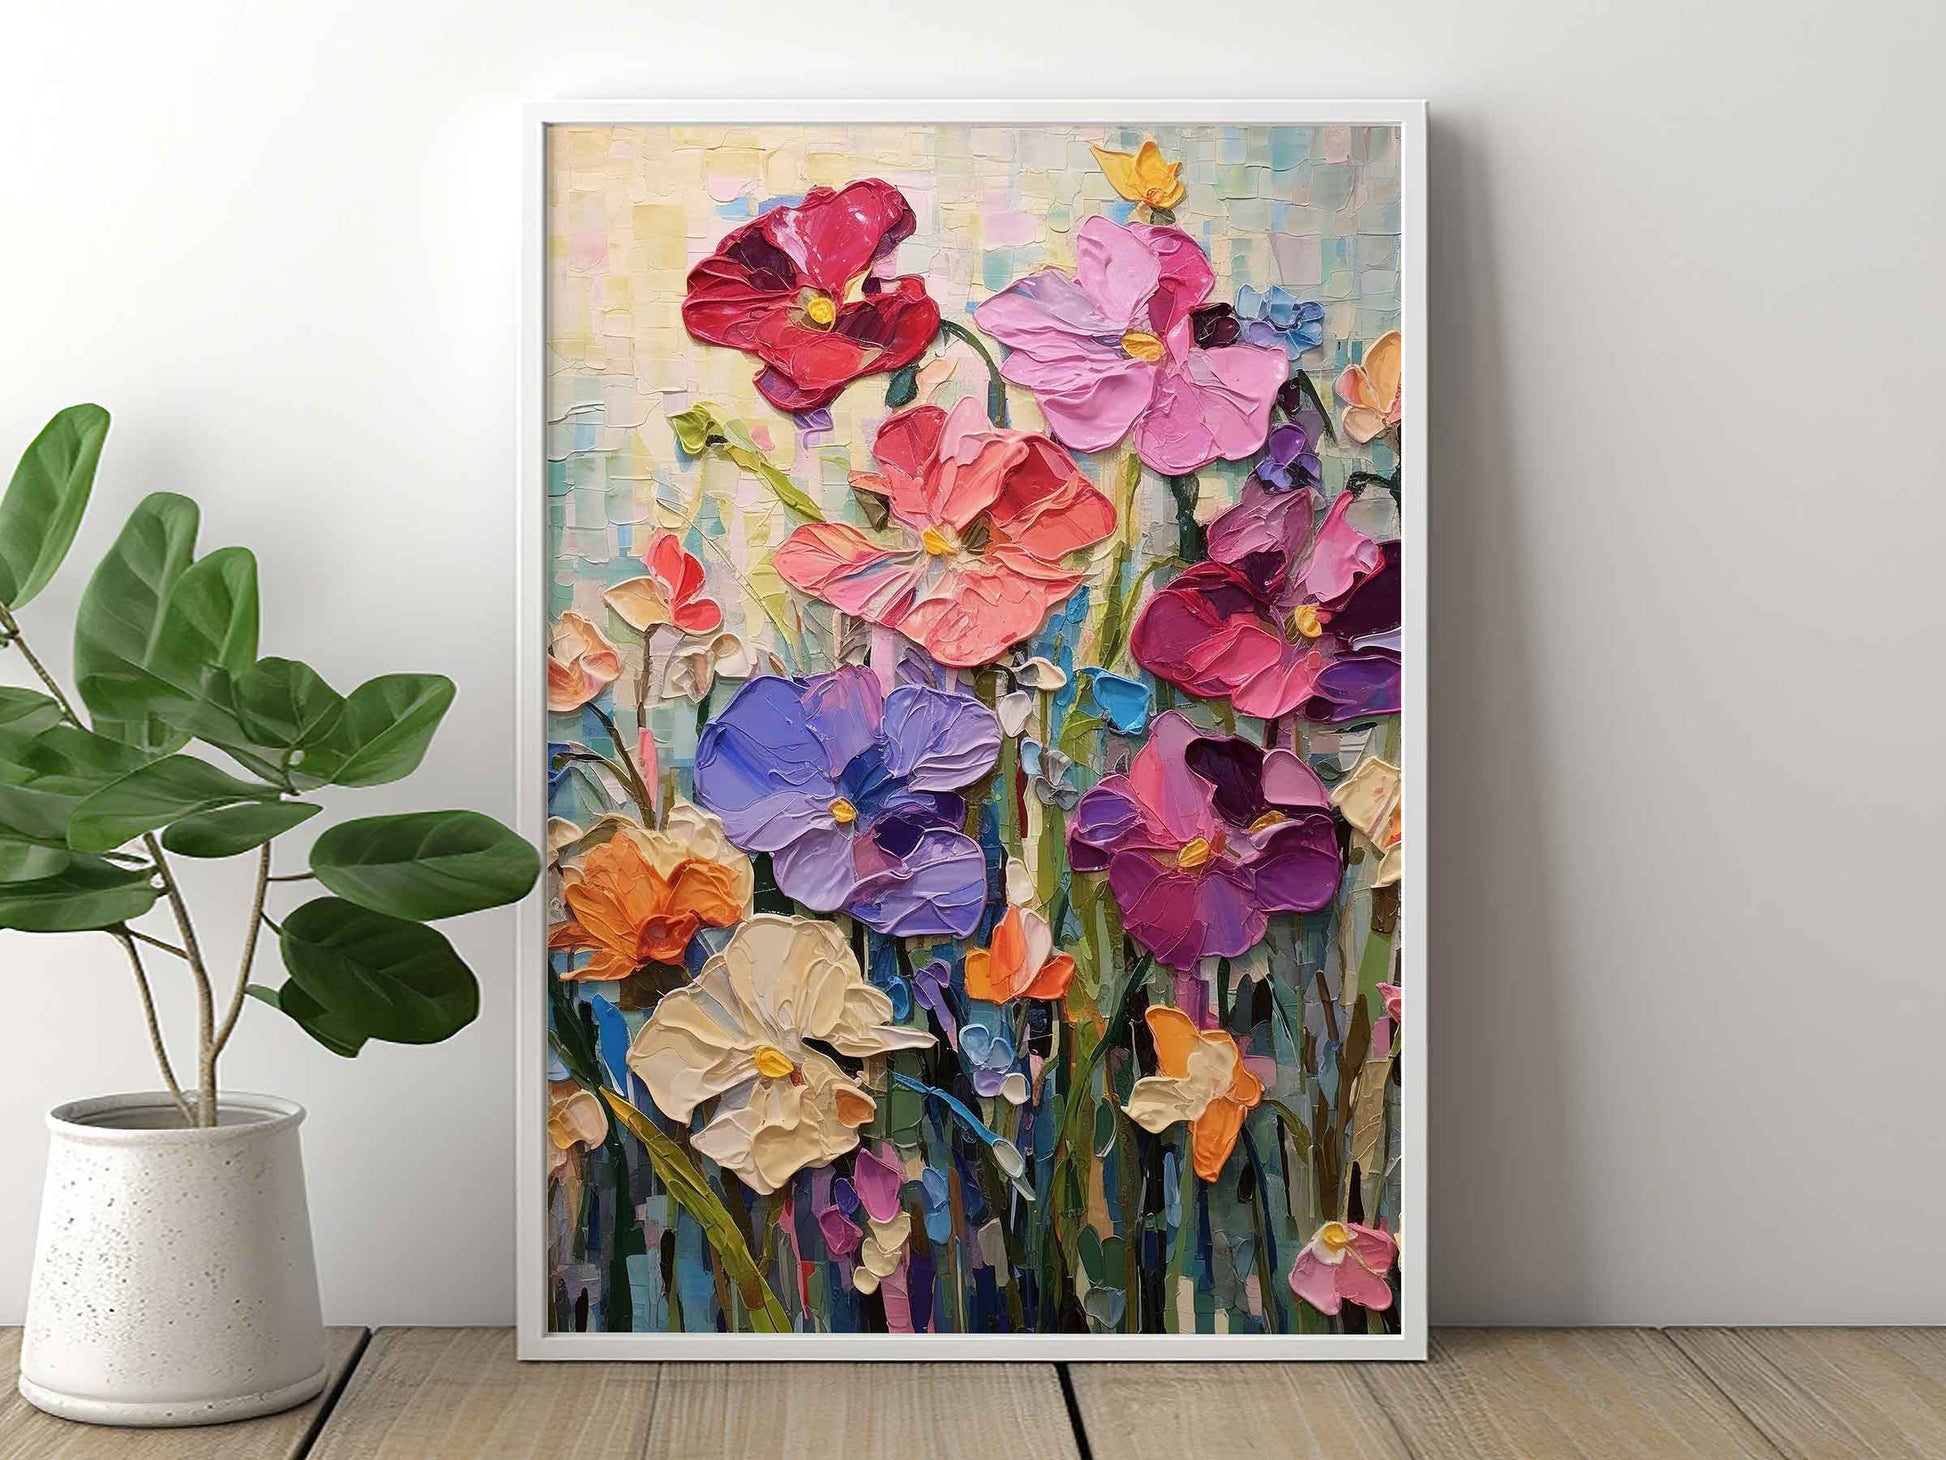 Framed Image of Colourful Flowers Oil Painting Wall Art Prints Palette Thick Impasto